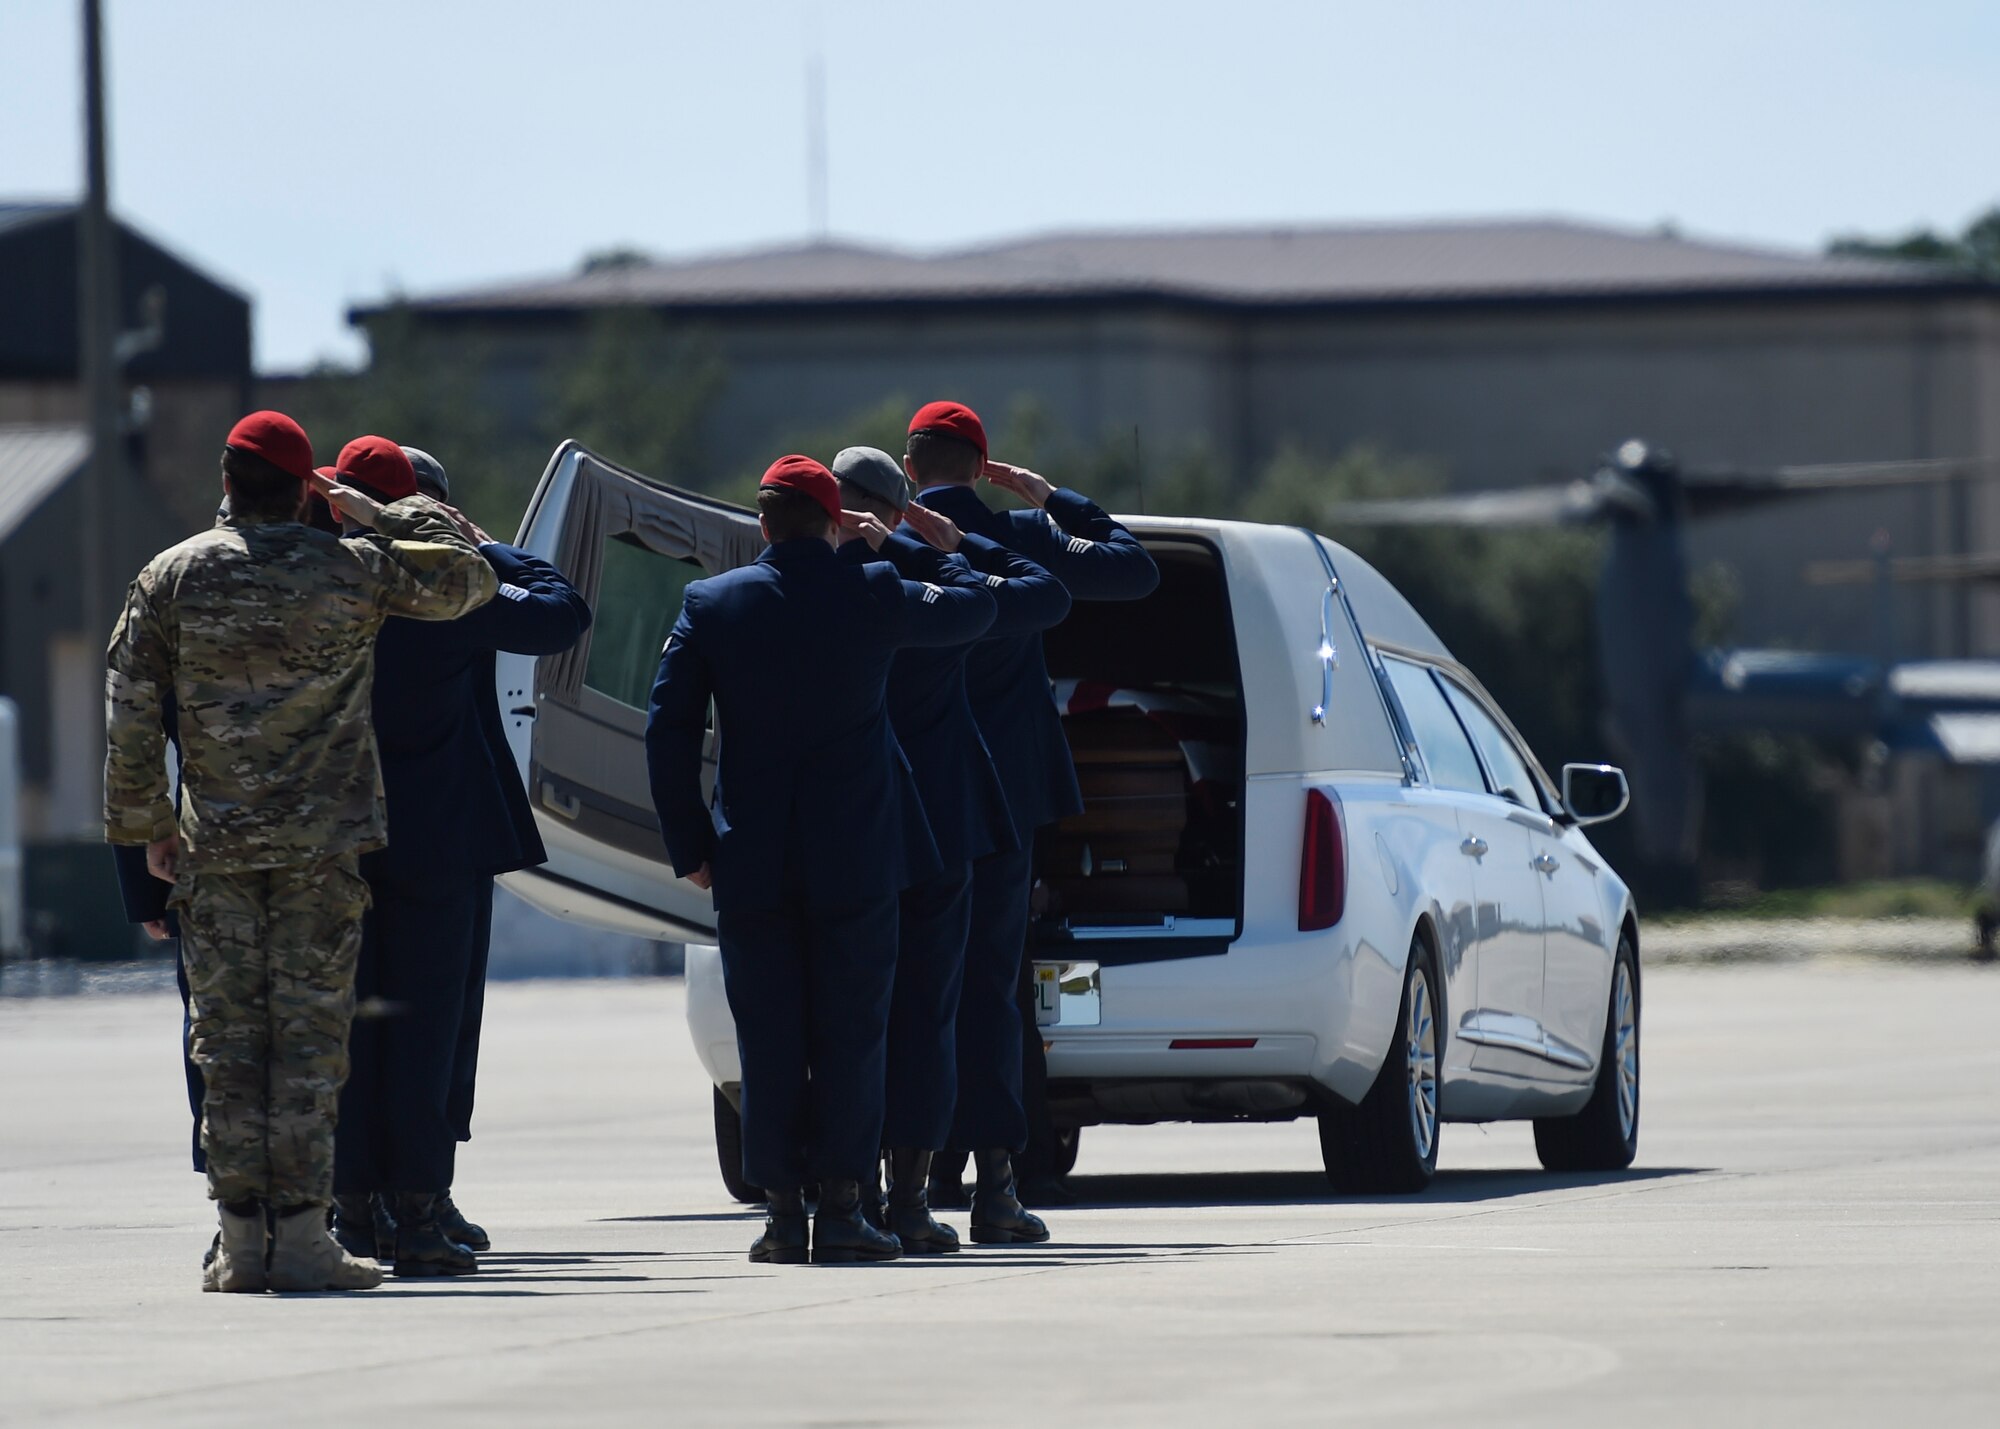 Special Tactics Airmen salute the remains of Staff Sgt. Forrest B. Sibley during a dignified transfer on Hurlburt Field, Fla., Sept. 14, 2015. The two Special Tactics Airmen, who had recently deployed to Afghanistan in support of Operation Freedom's Sentinel, were shot at a vehicle checkpoint at Camp Antonik, Afghanistan, Aug. 26, and died of wounds sustained in the attack, were honored in a private memorial.  Both Special Tactics Airmen will be buried with full military honors. (U.S. Air Force photo by Airman Kai White/Released)